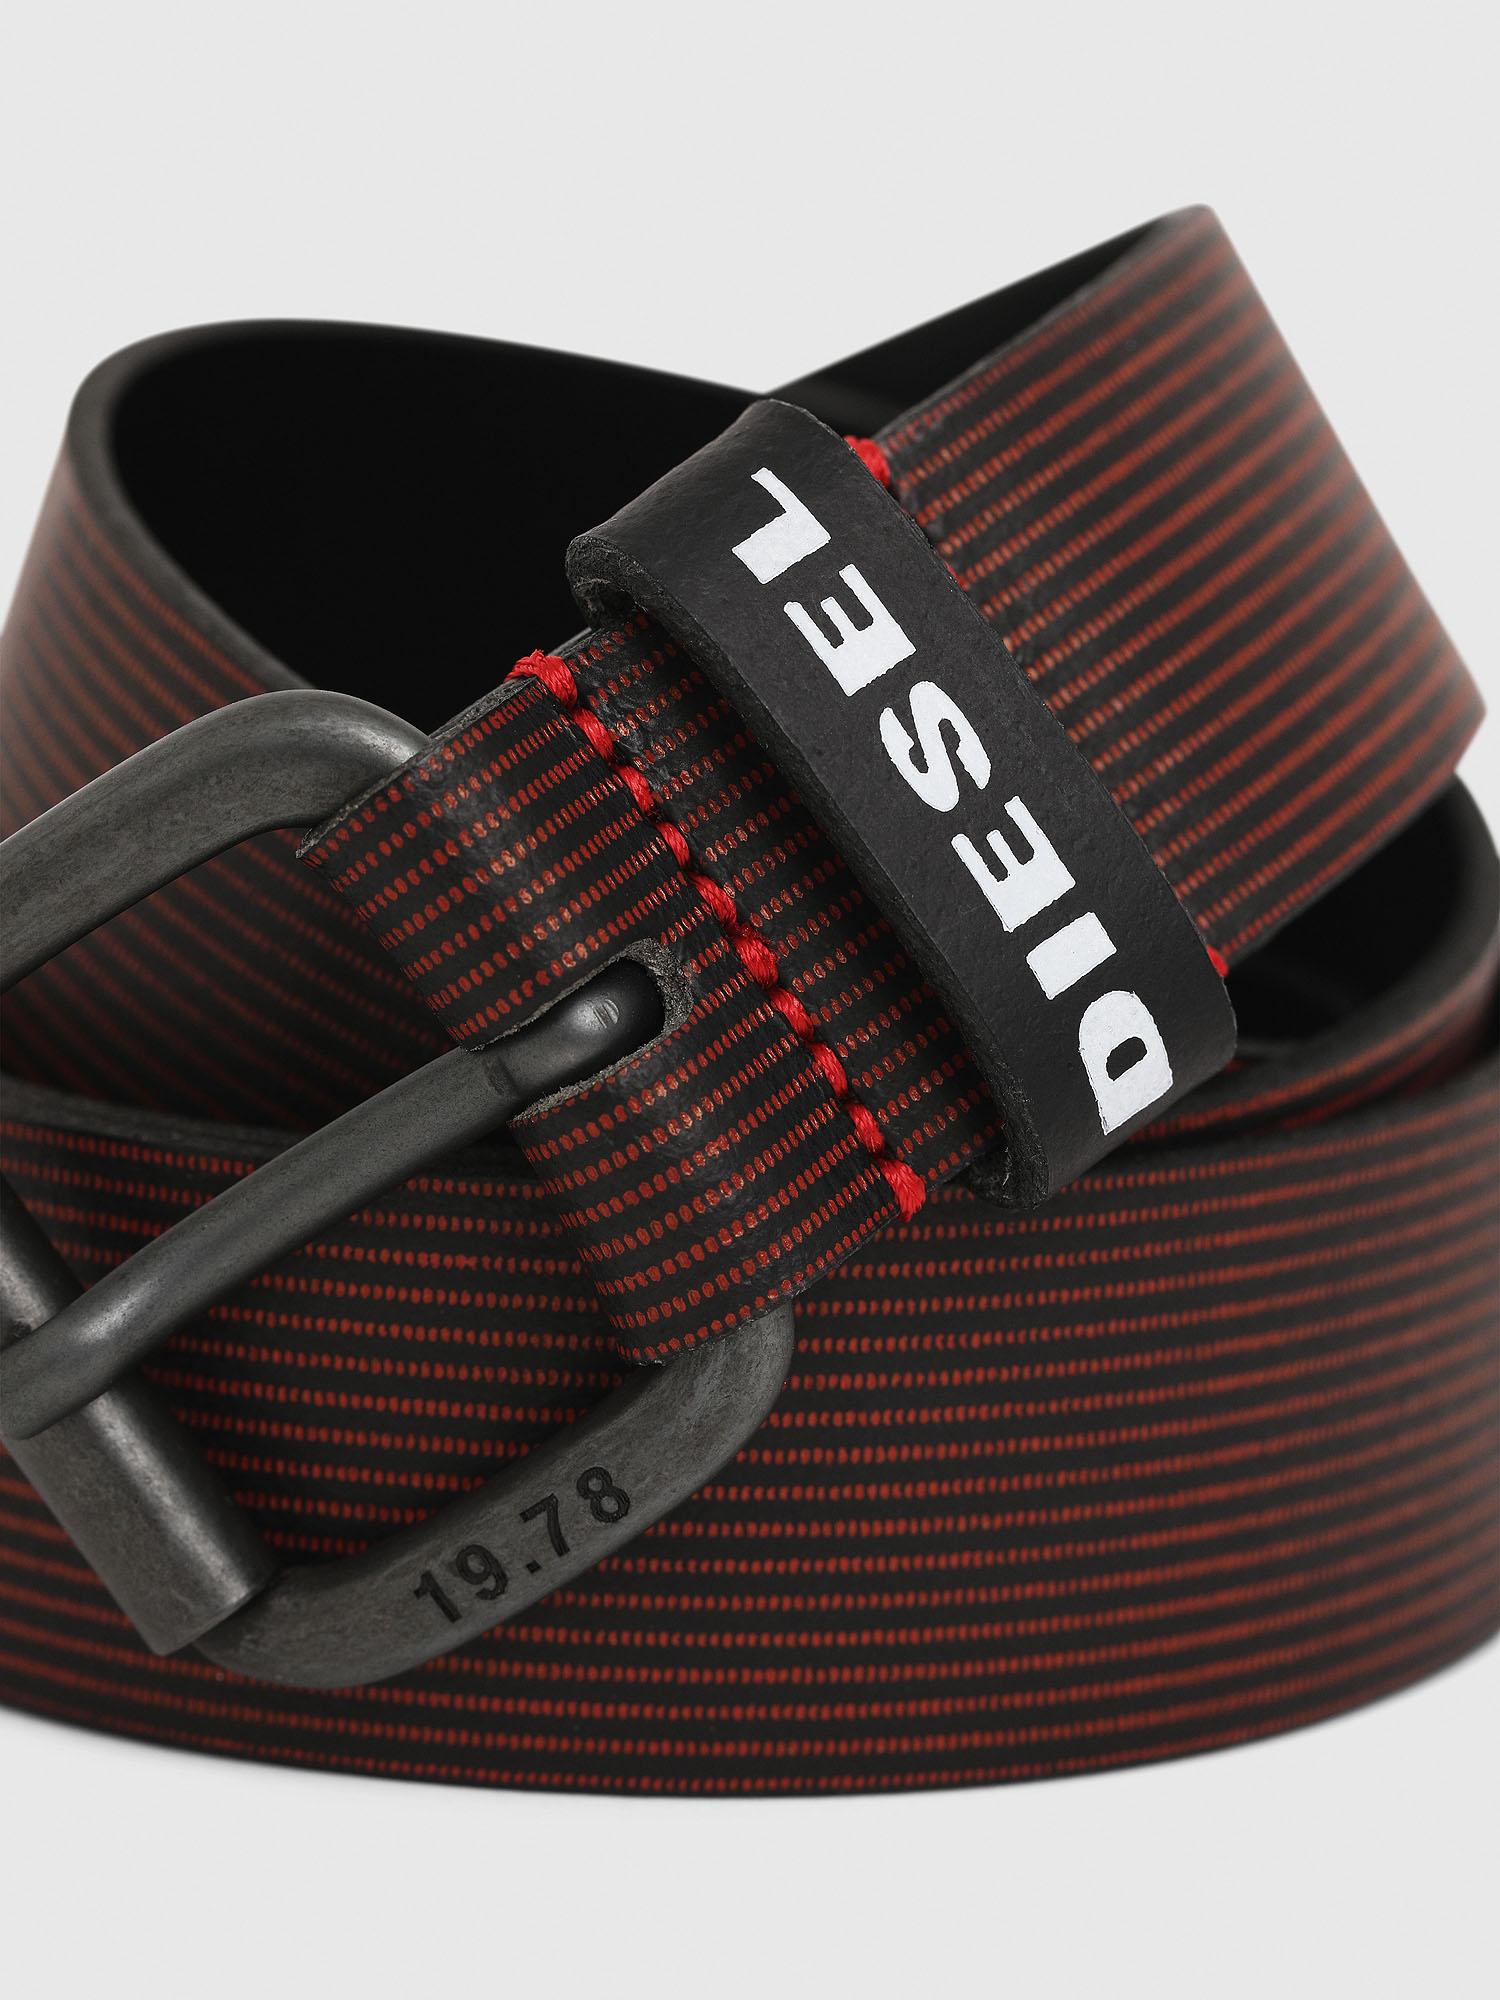 DIESEL B-cava Leather Belt With Ridged Texture in Black for Men - Lyst